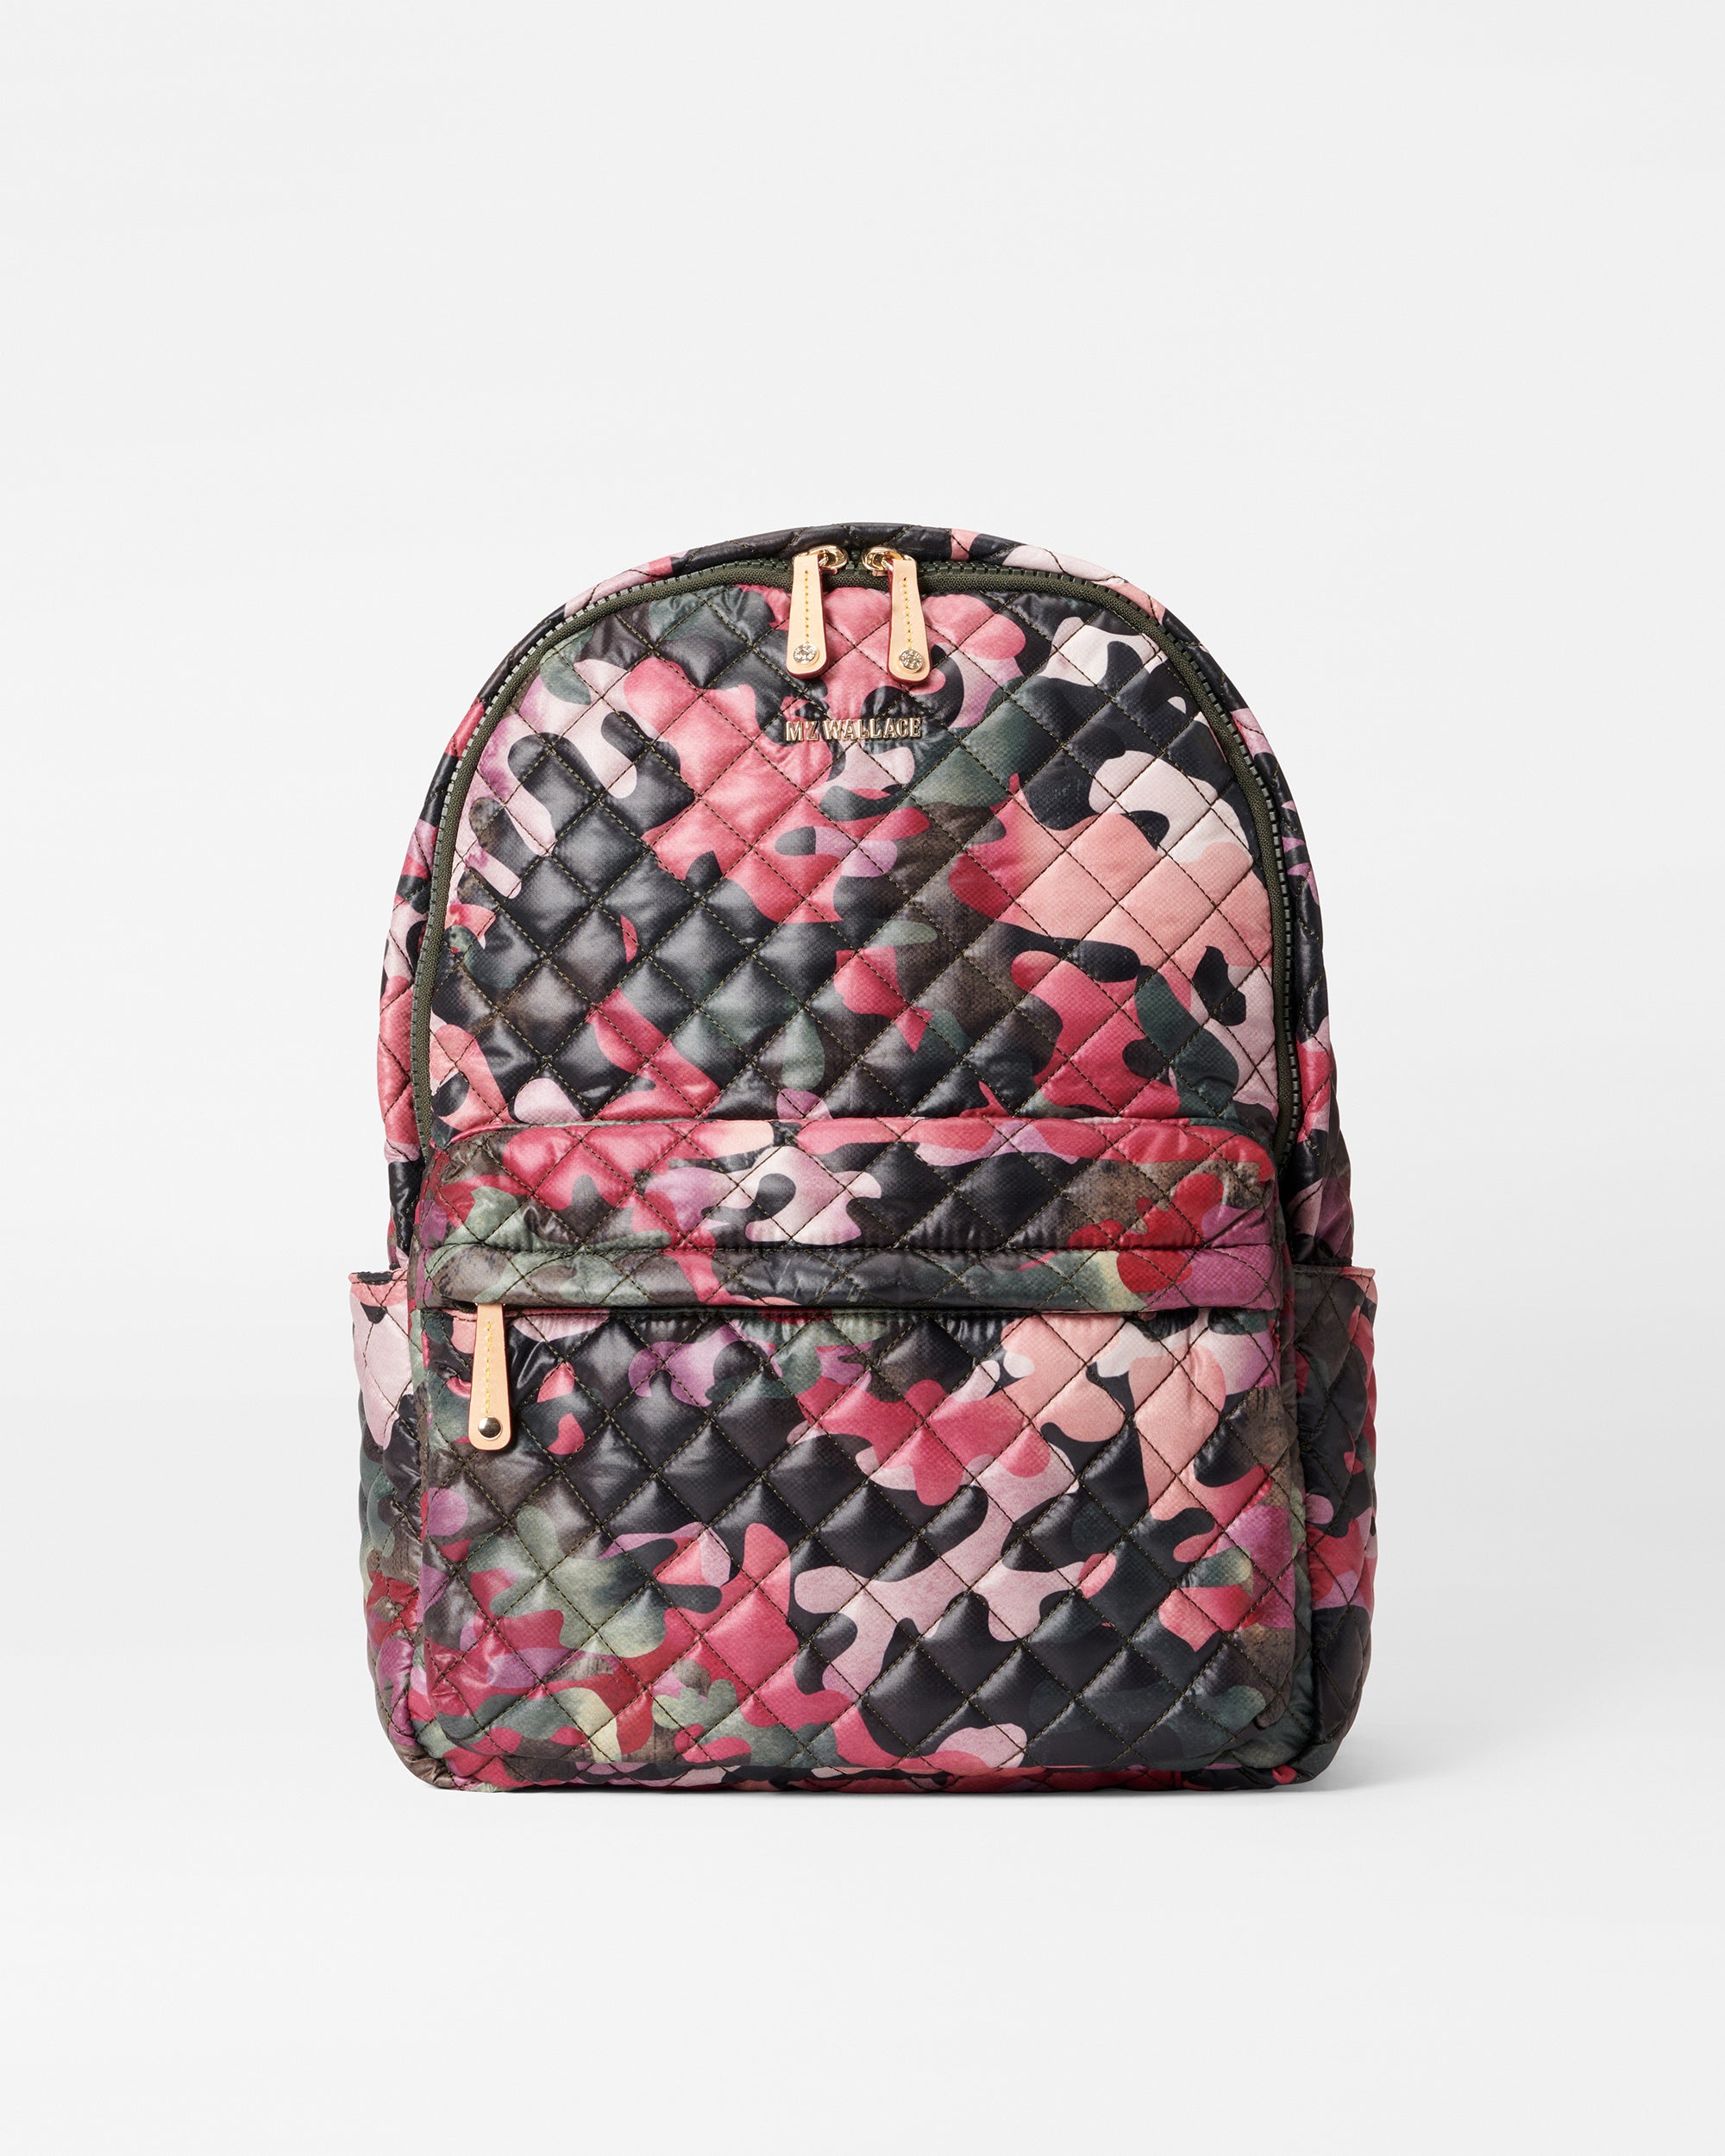 MZ Wallace Magnet Metro Backpack